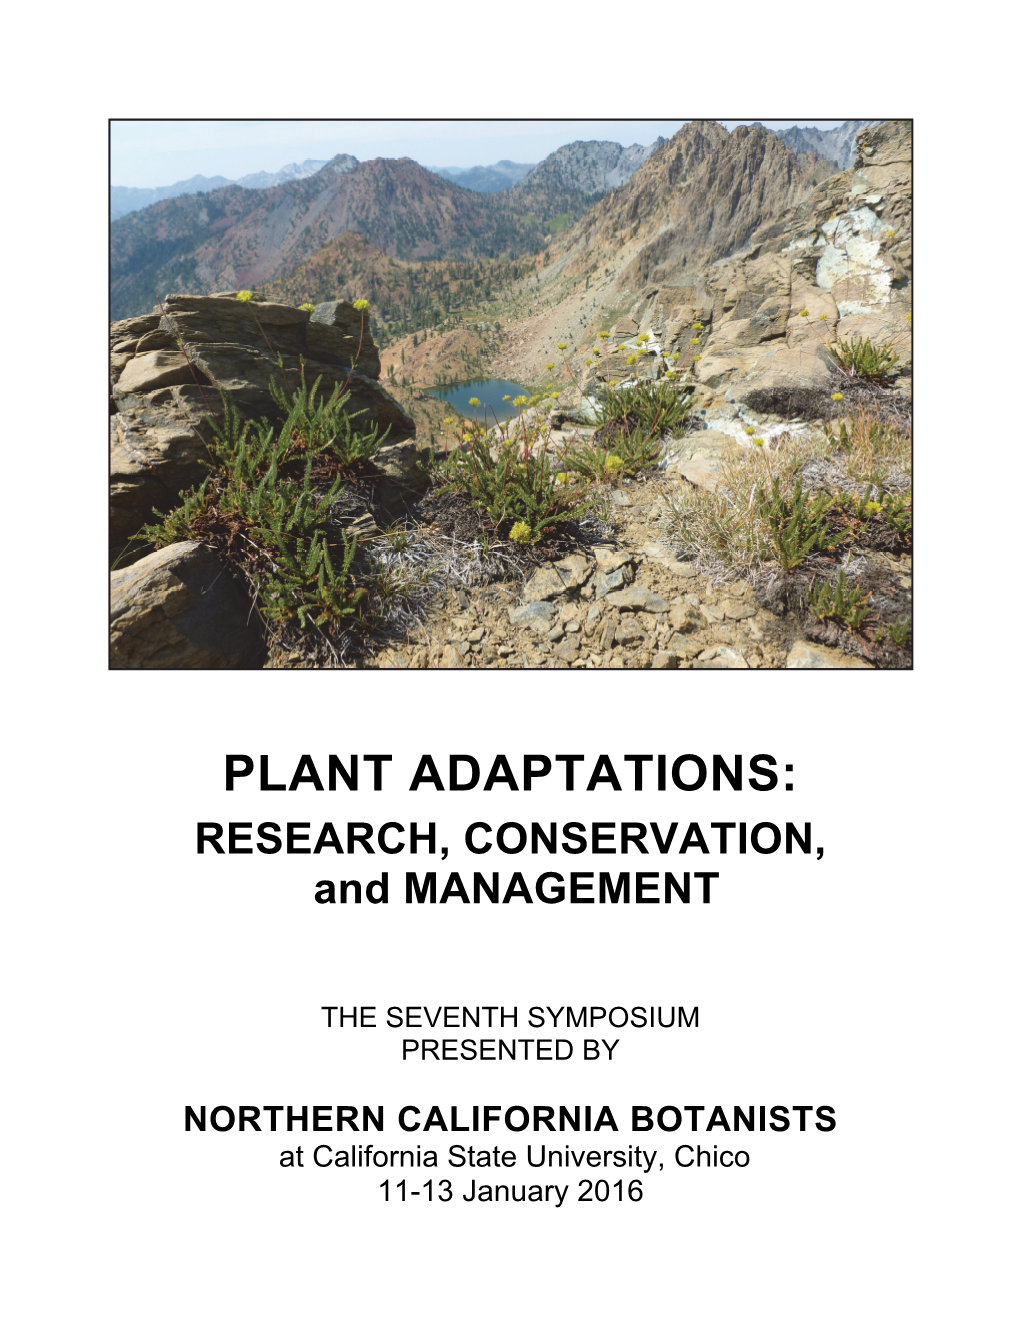 PLANT ADAPTATIONS: RESEARCH, CONSERVATION, and MANAGEMENT